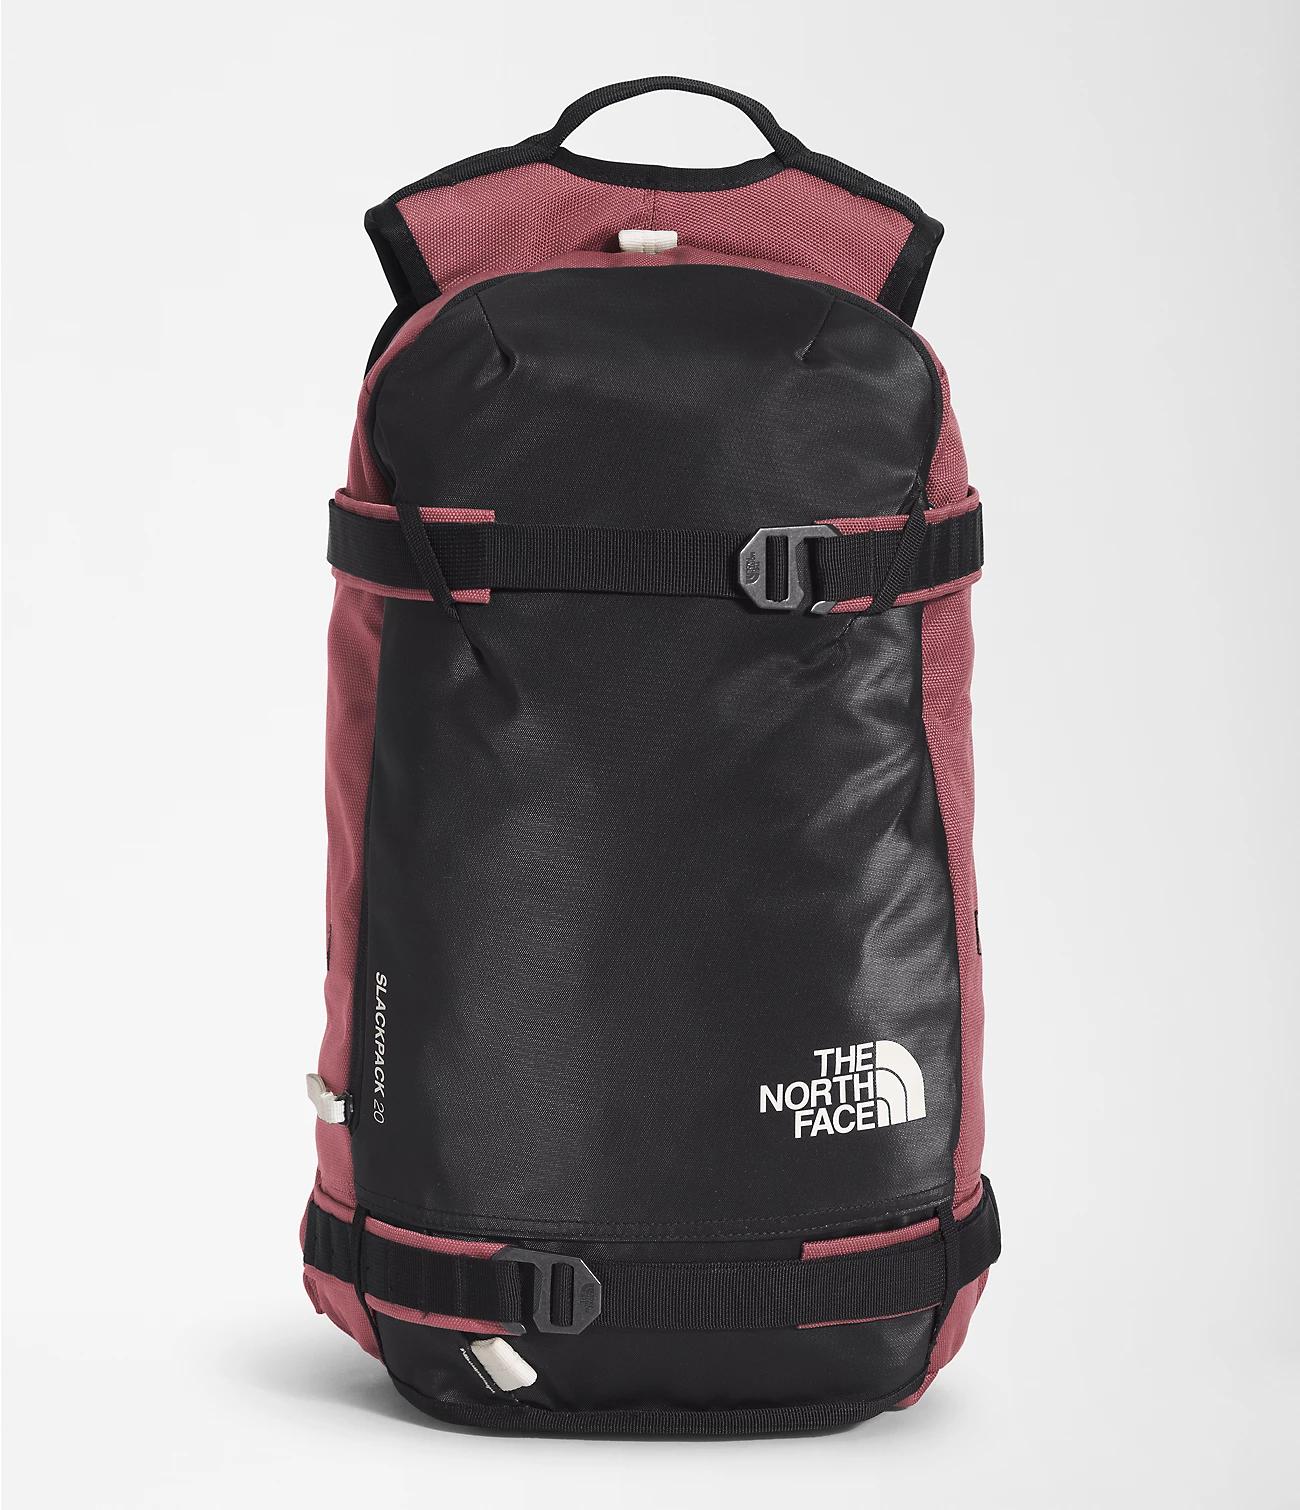 Kabig 2.0 38L Backpack by THE NORTH FACE | jellibeans